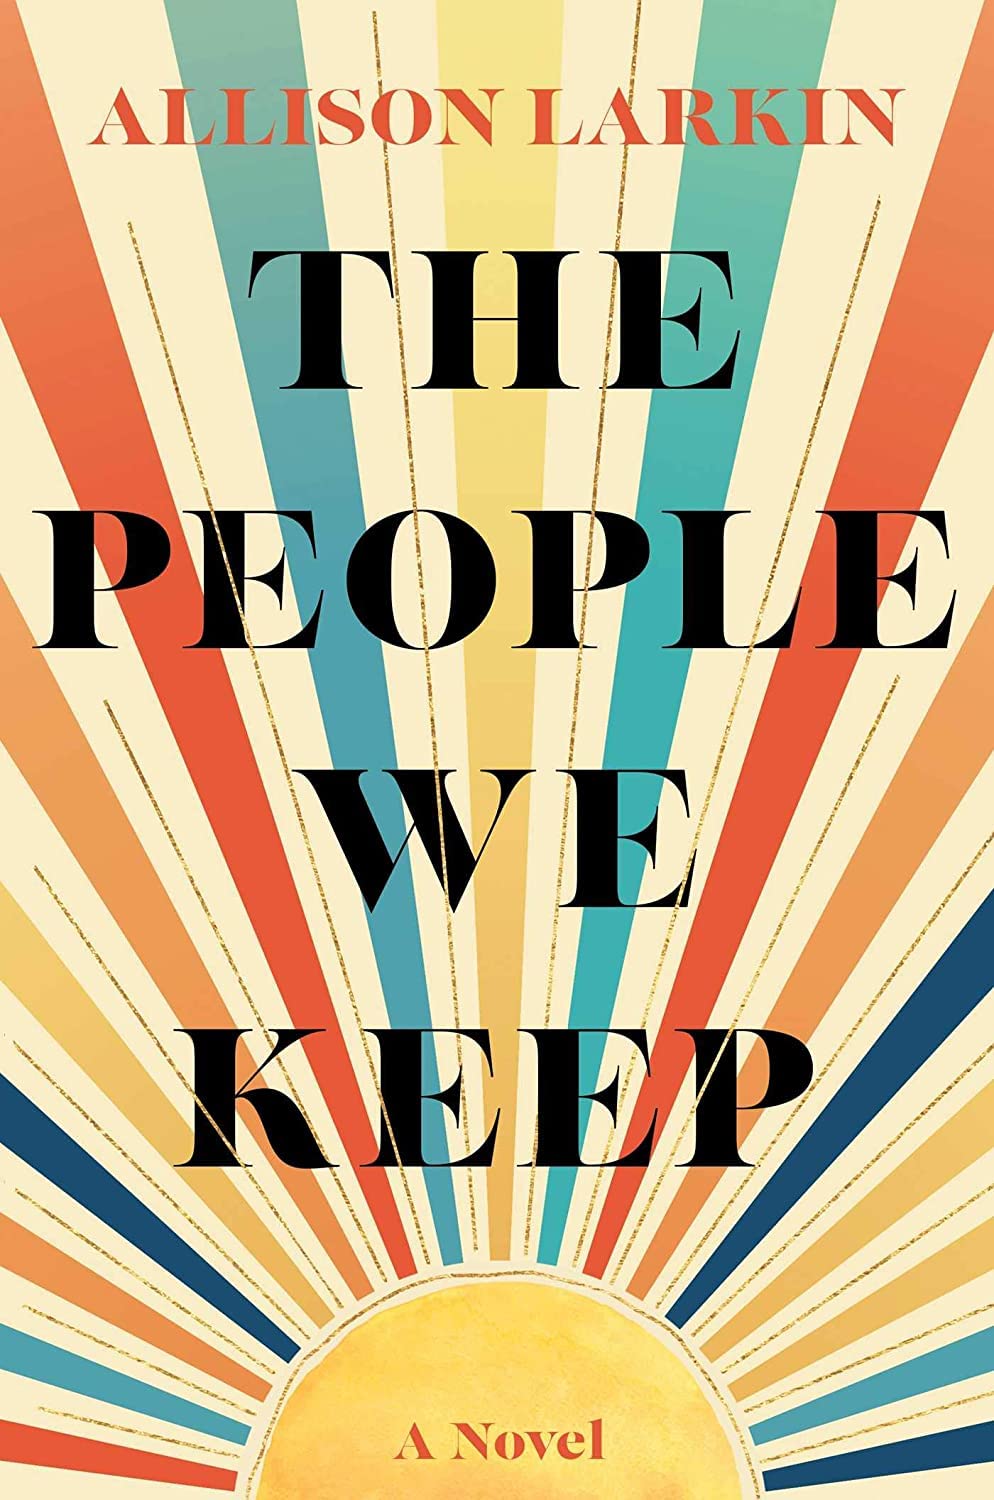 Cover of the The People We Keep by Allison Larkin